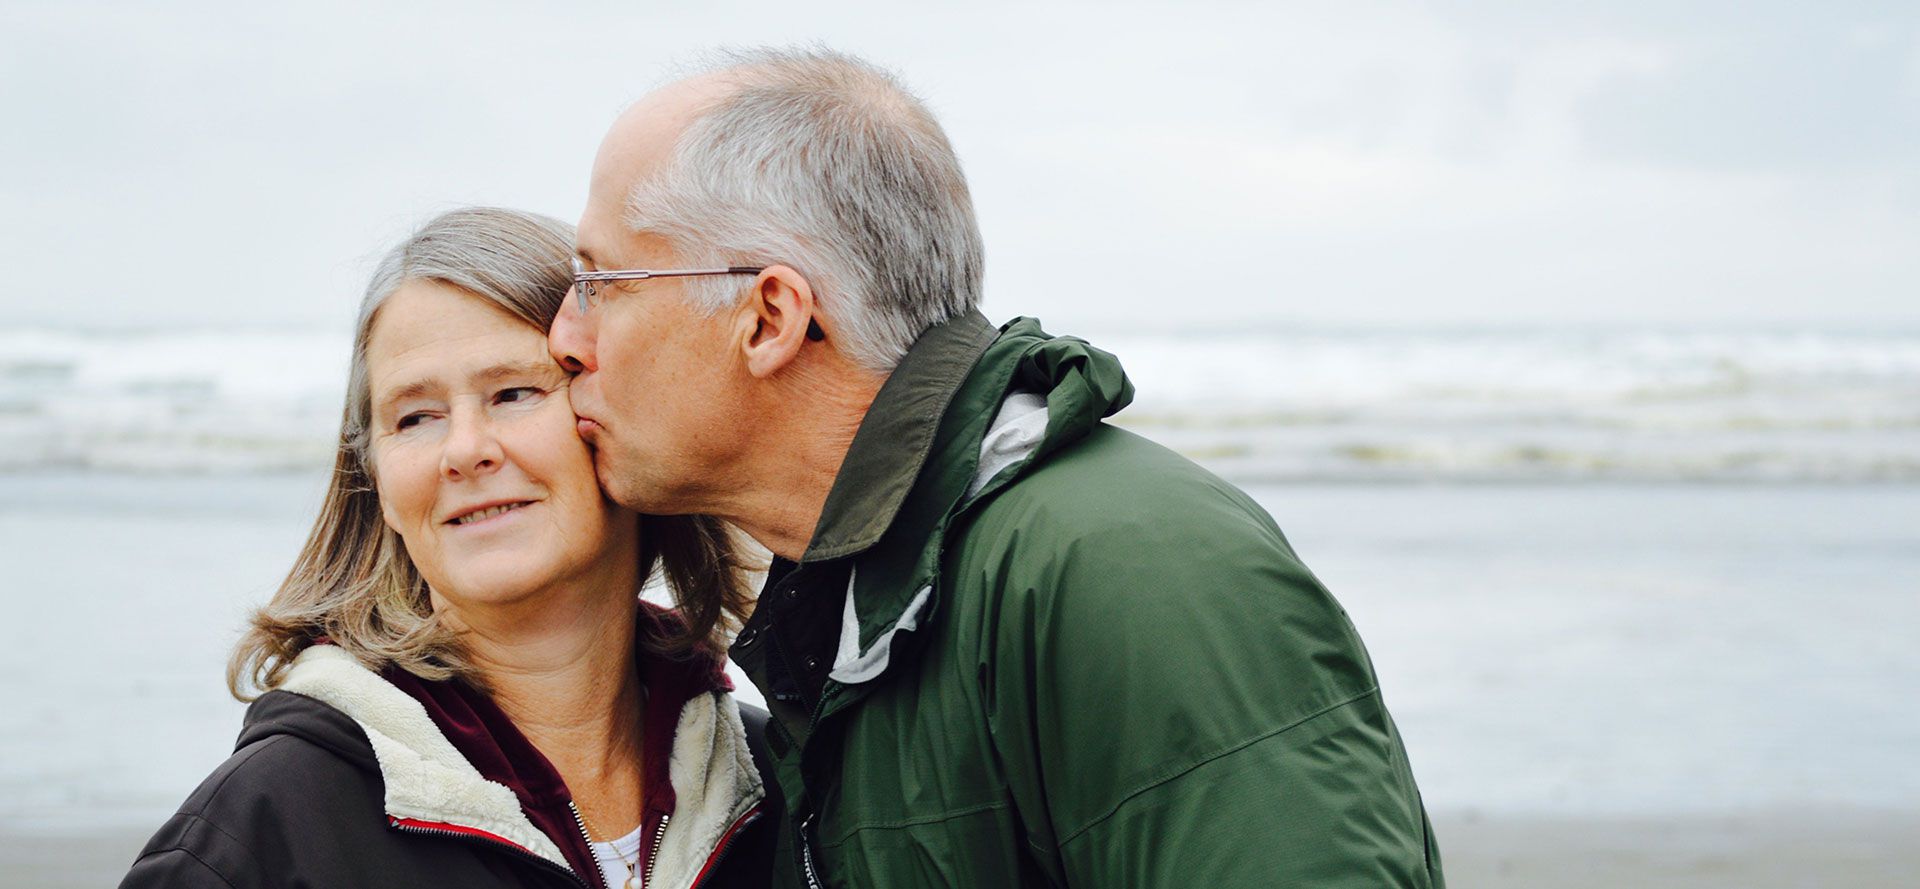 An elderly man kisses his soul mate against the background of the sea.